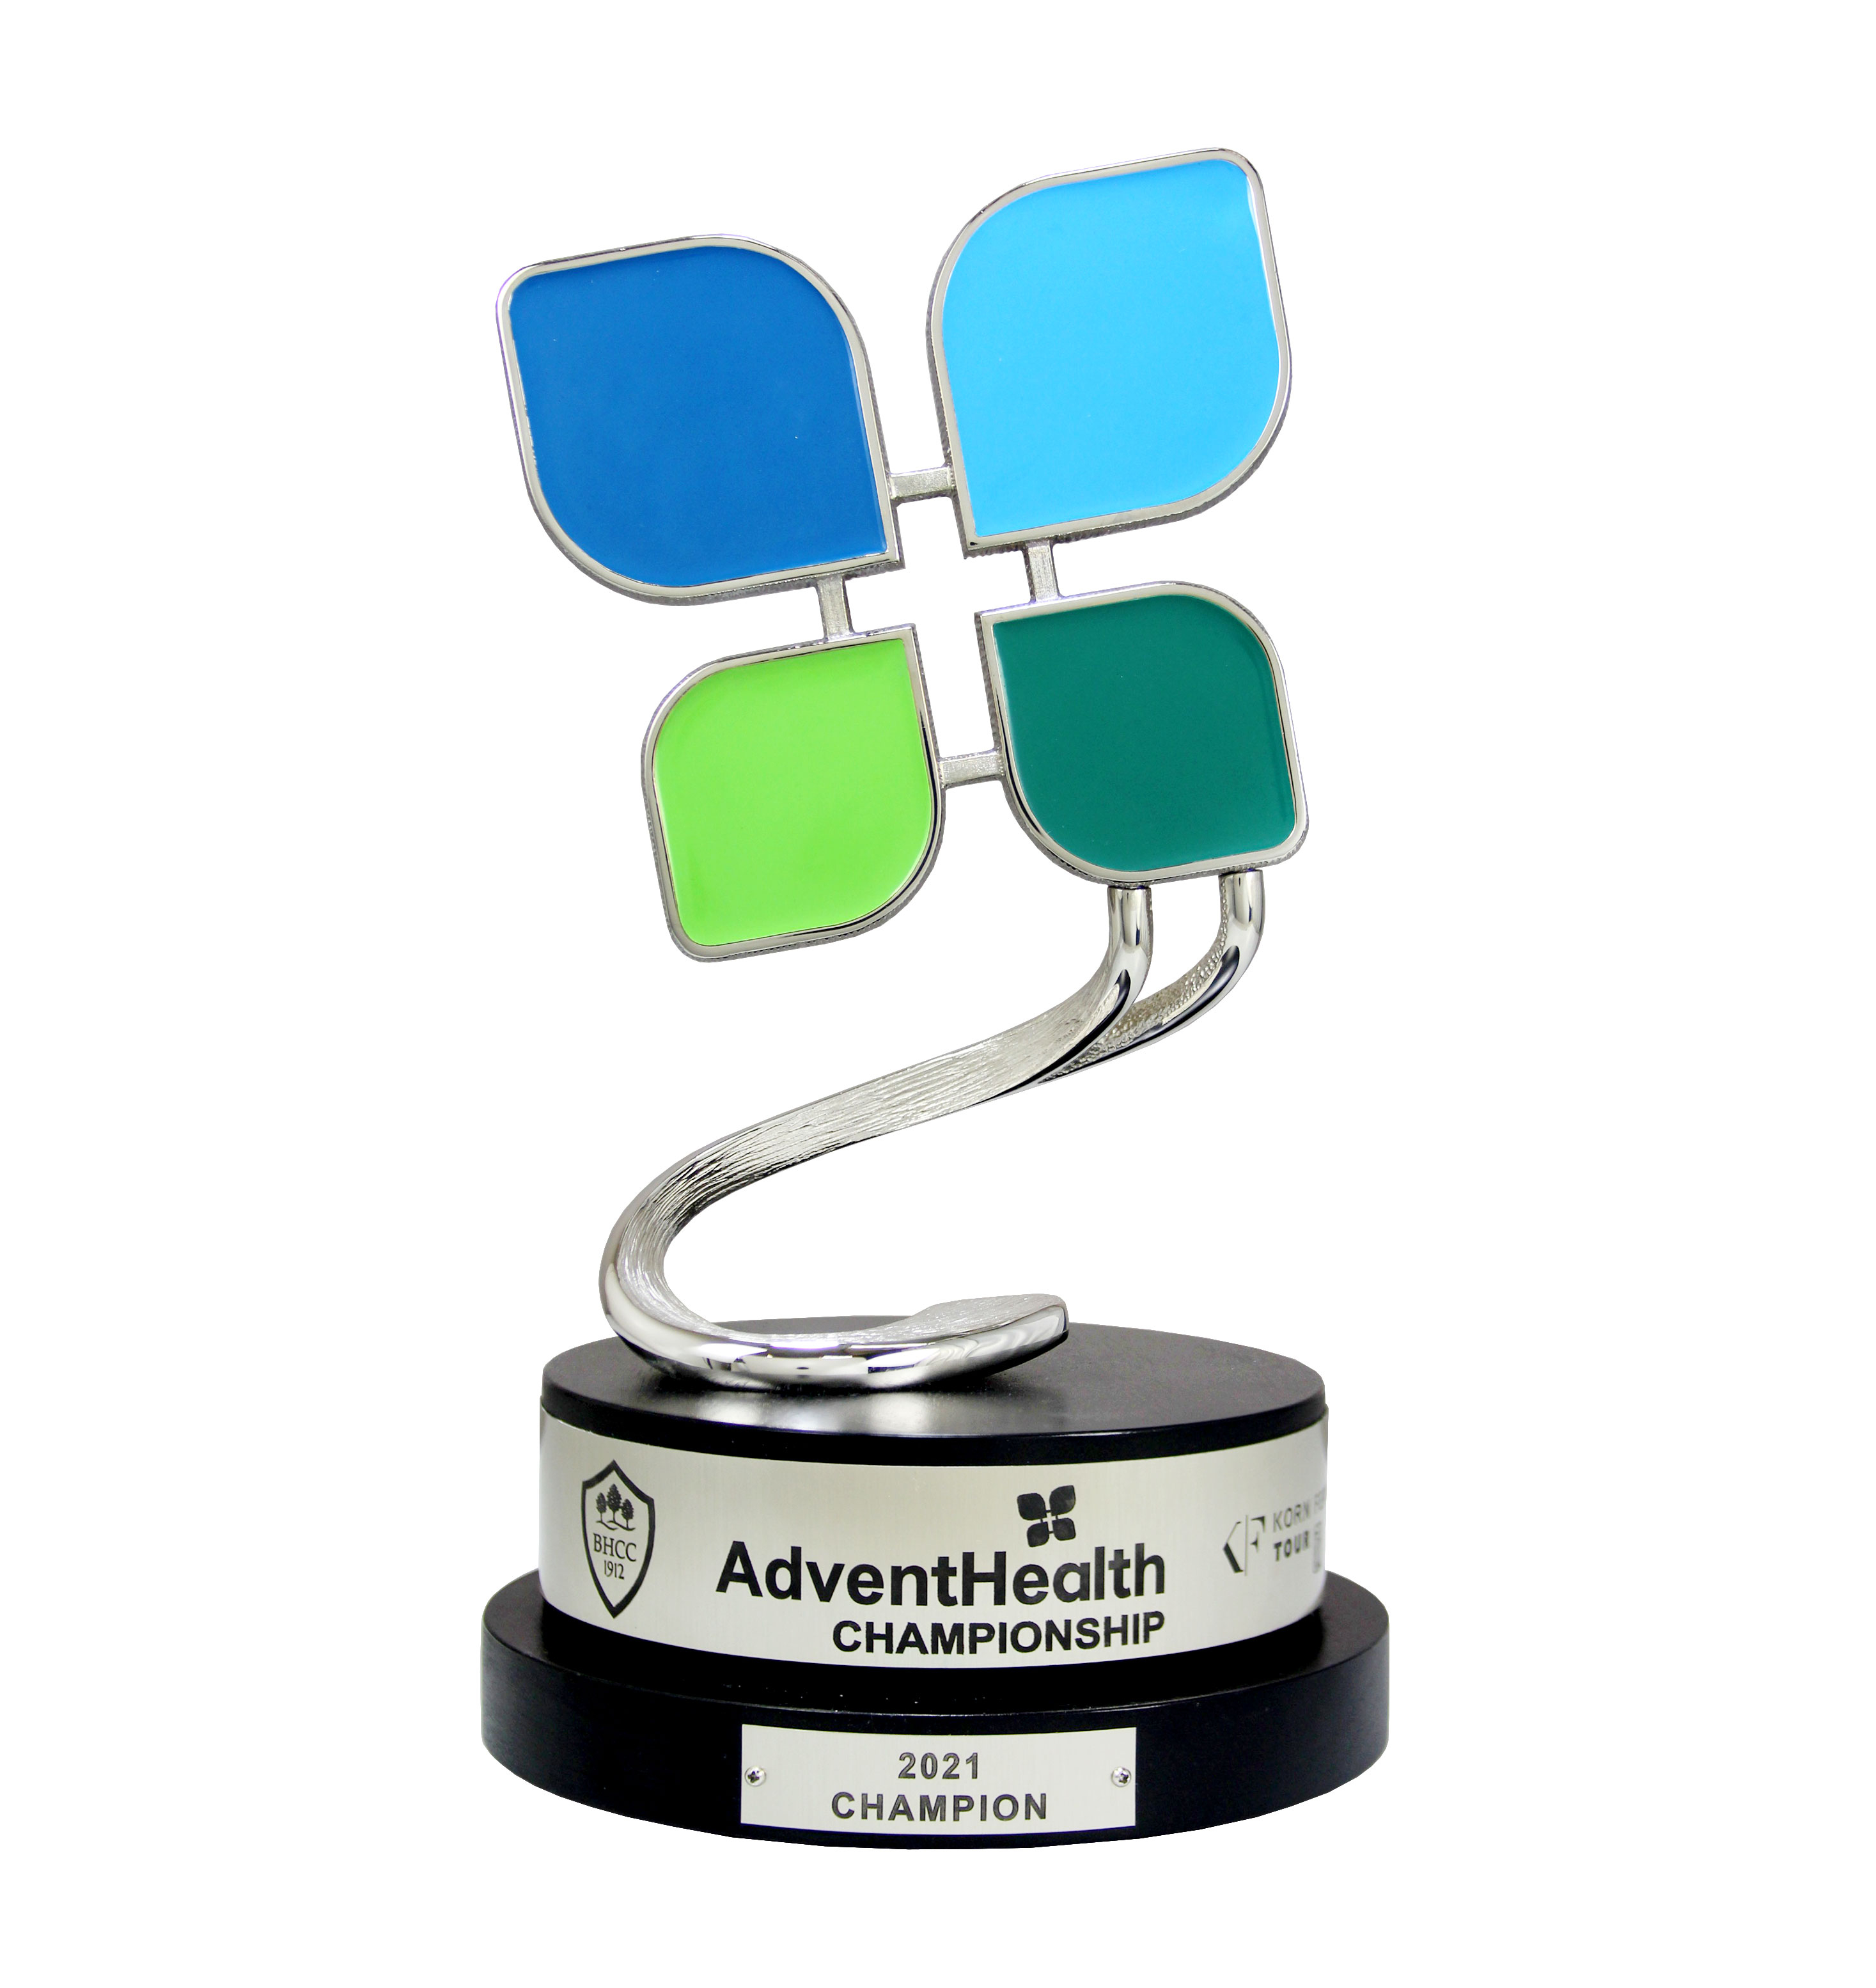 AdventHealth Championship Trophy made by Malcolm DeMille